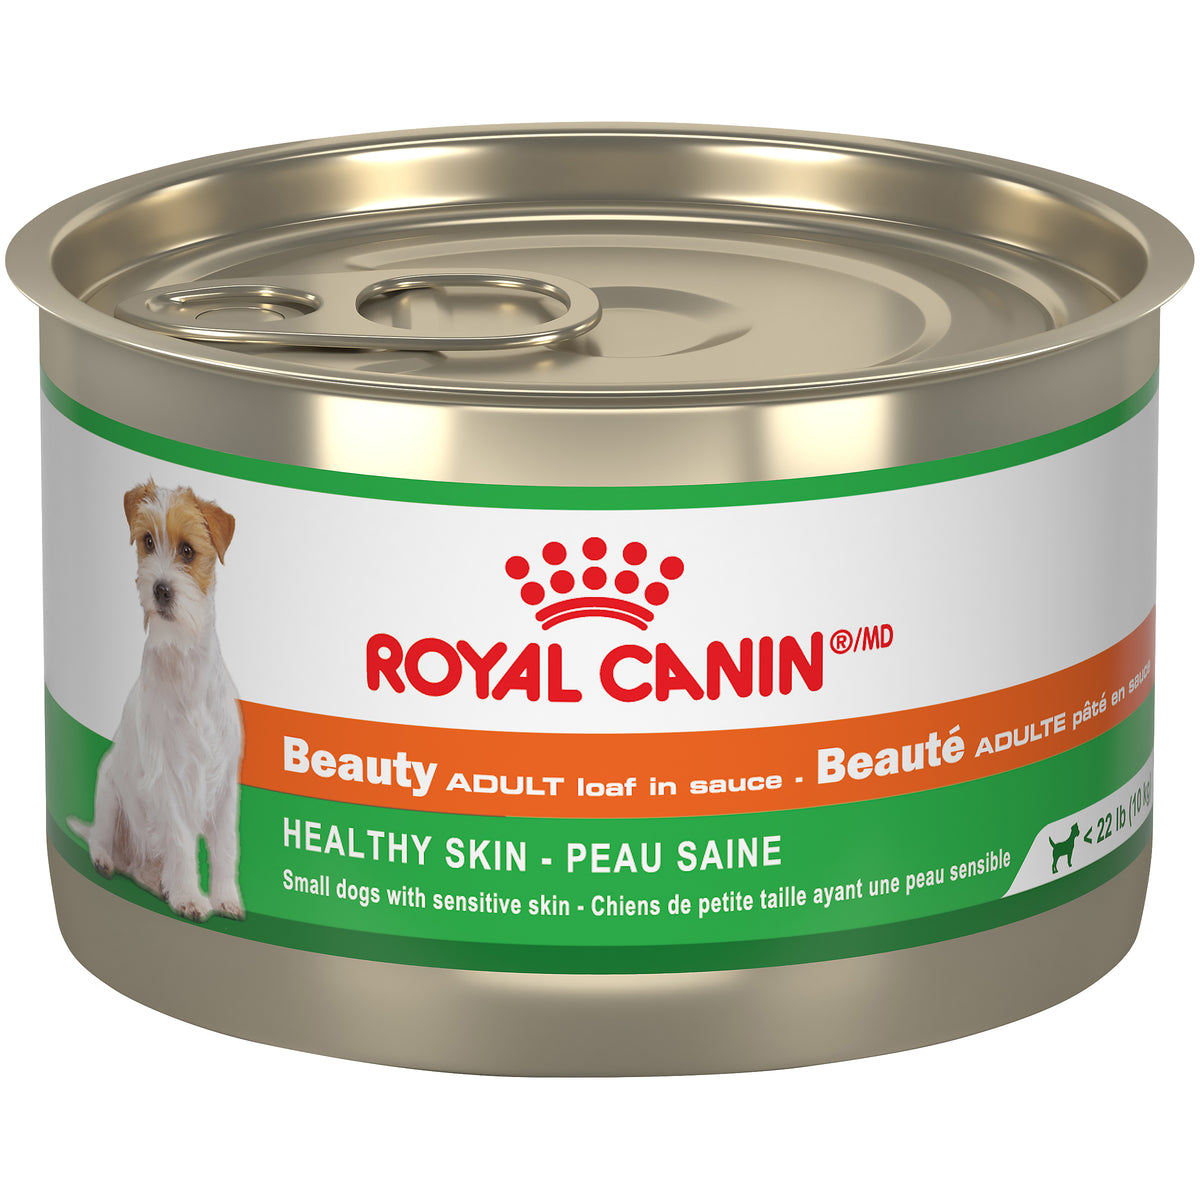 Royal Canin Beauty Adult - Wet Canned Dog Food (150g)